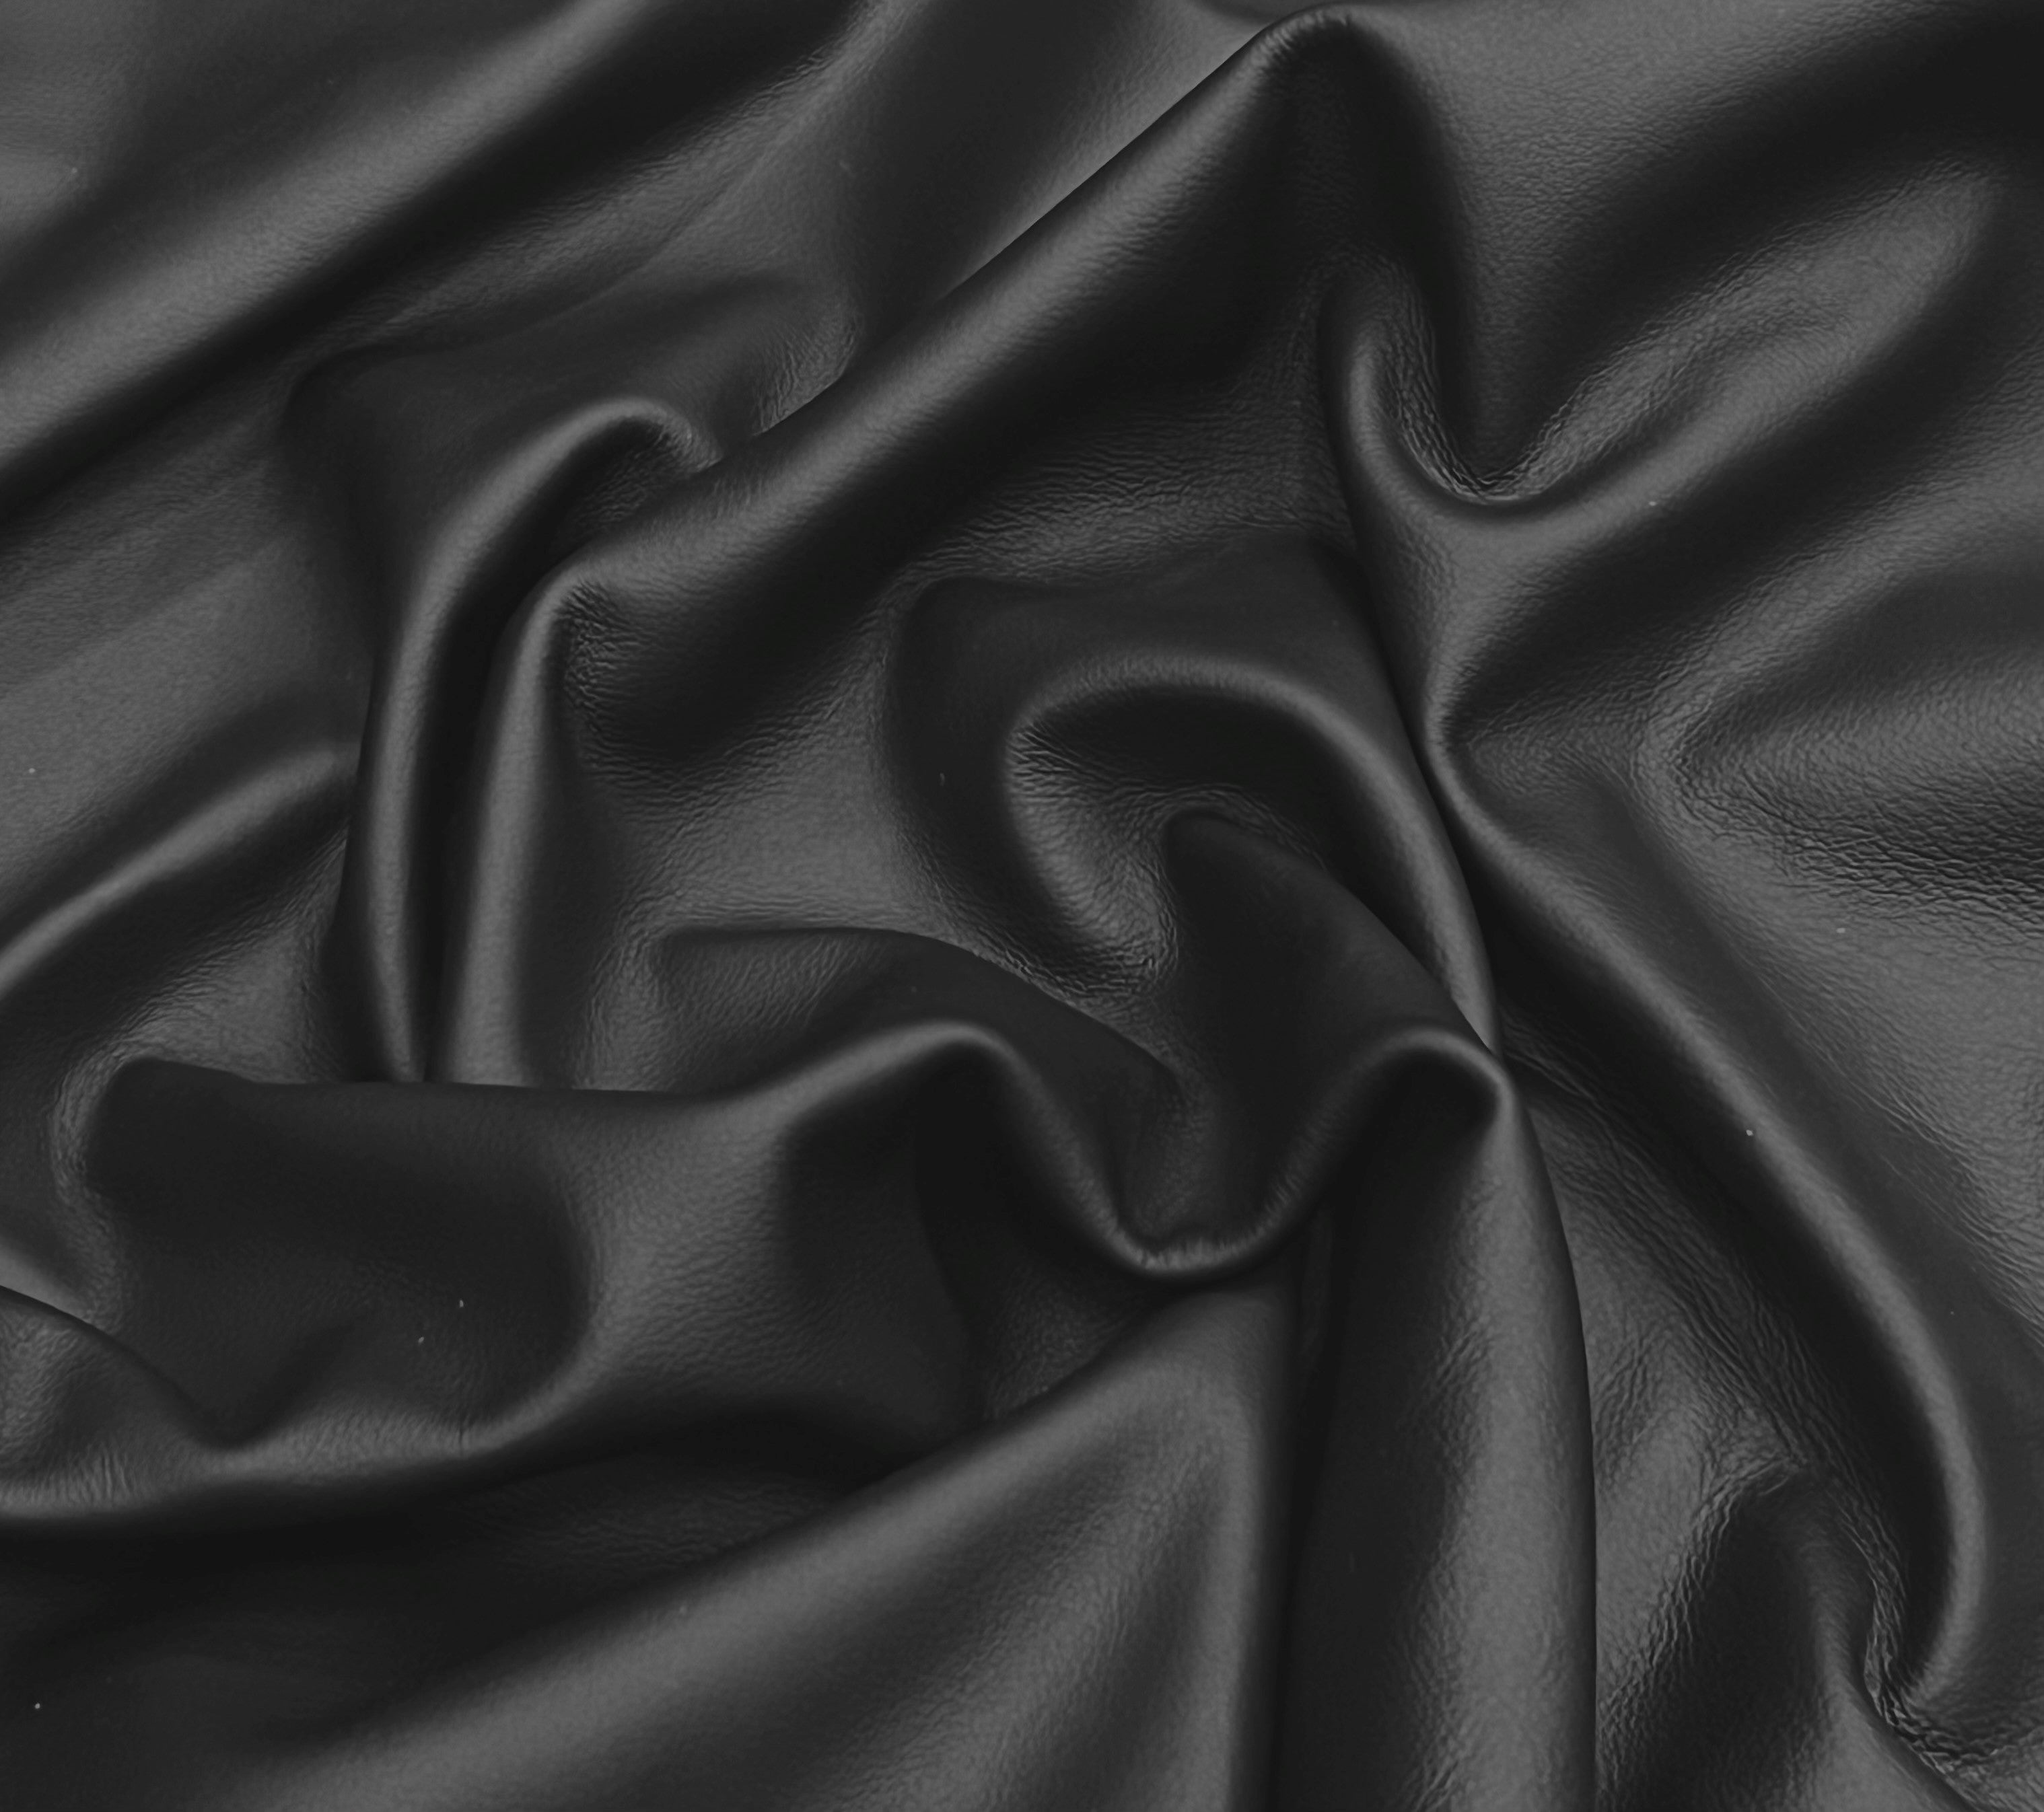 Minerva Black, Smooth Grain Upholstery Leather : 1.1-1.3mm (Ex Pittards Stock)